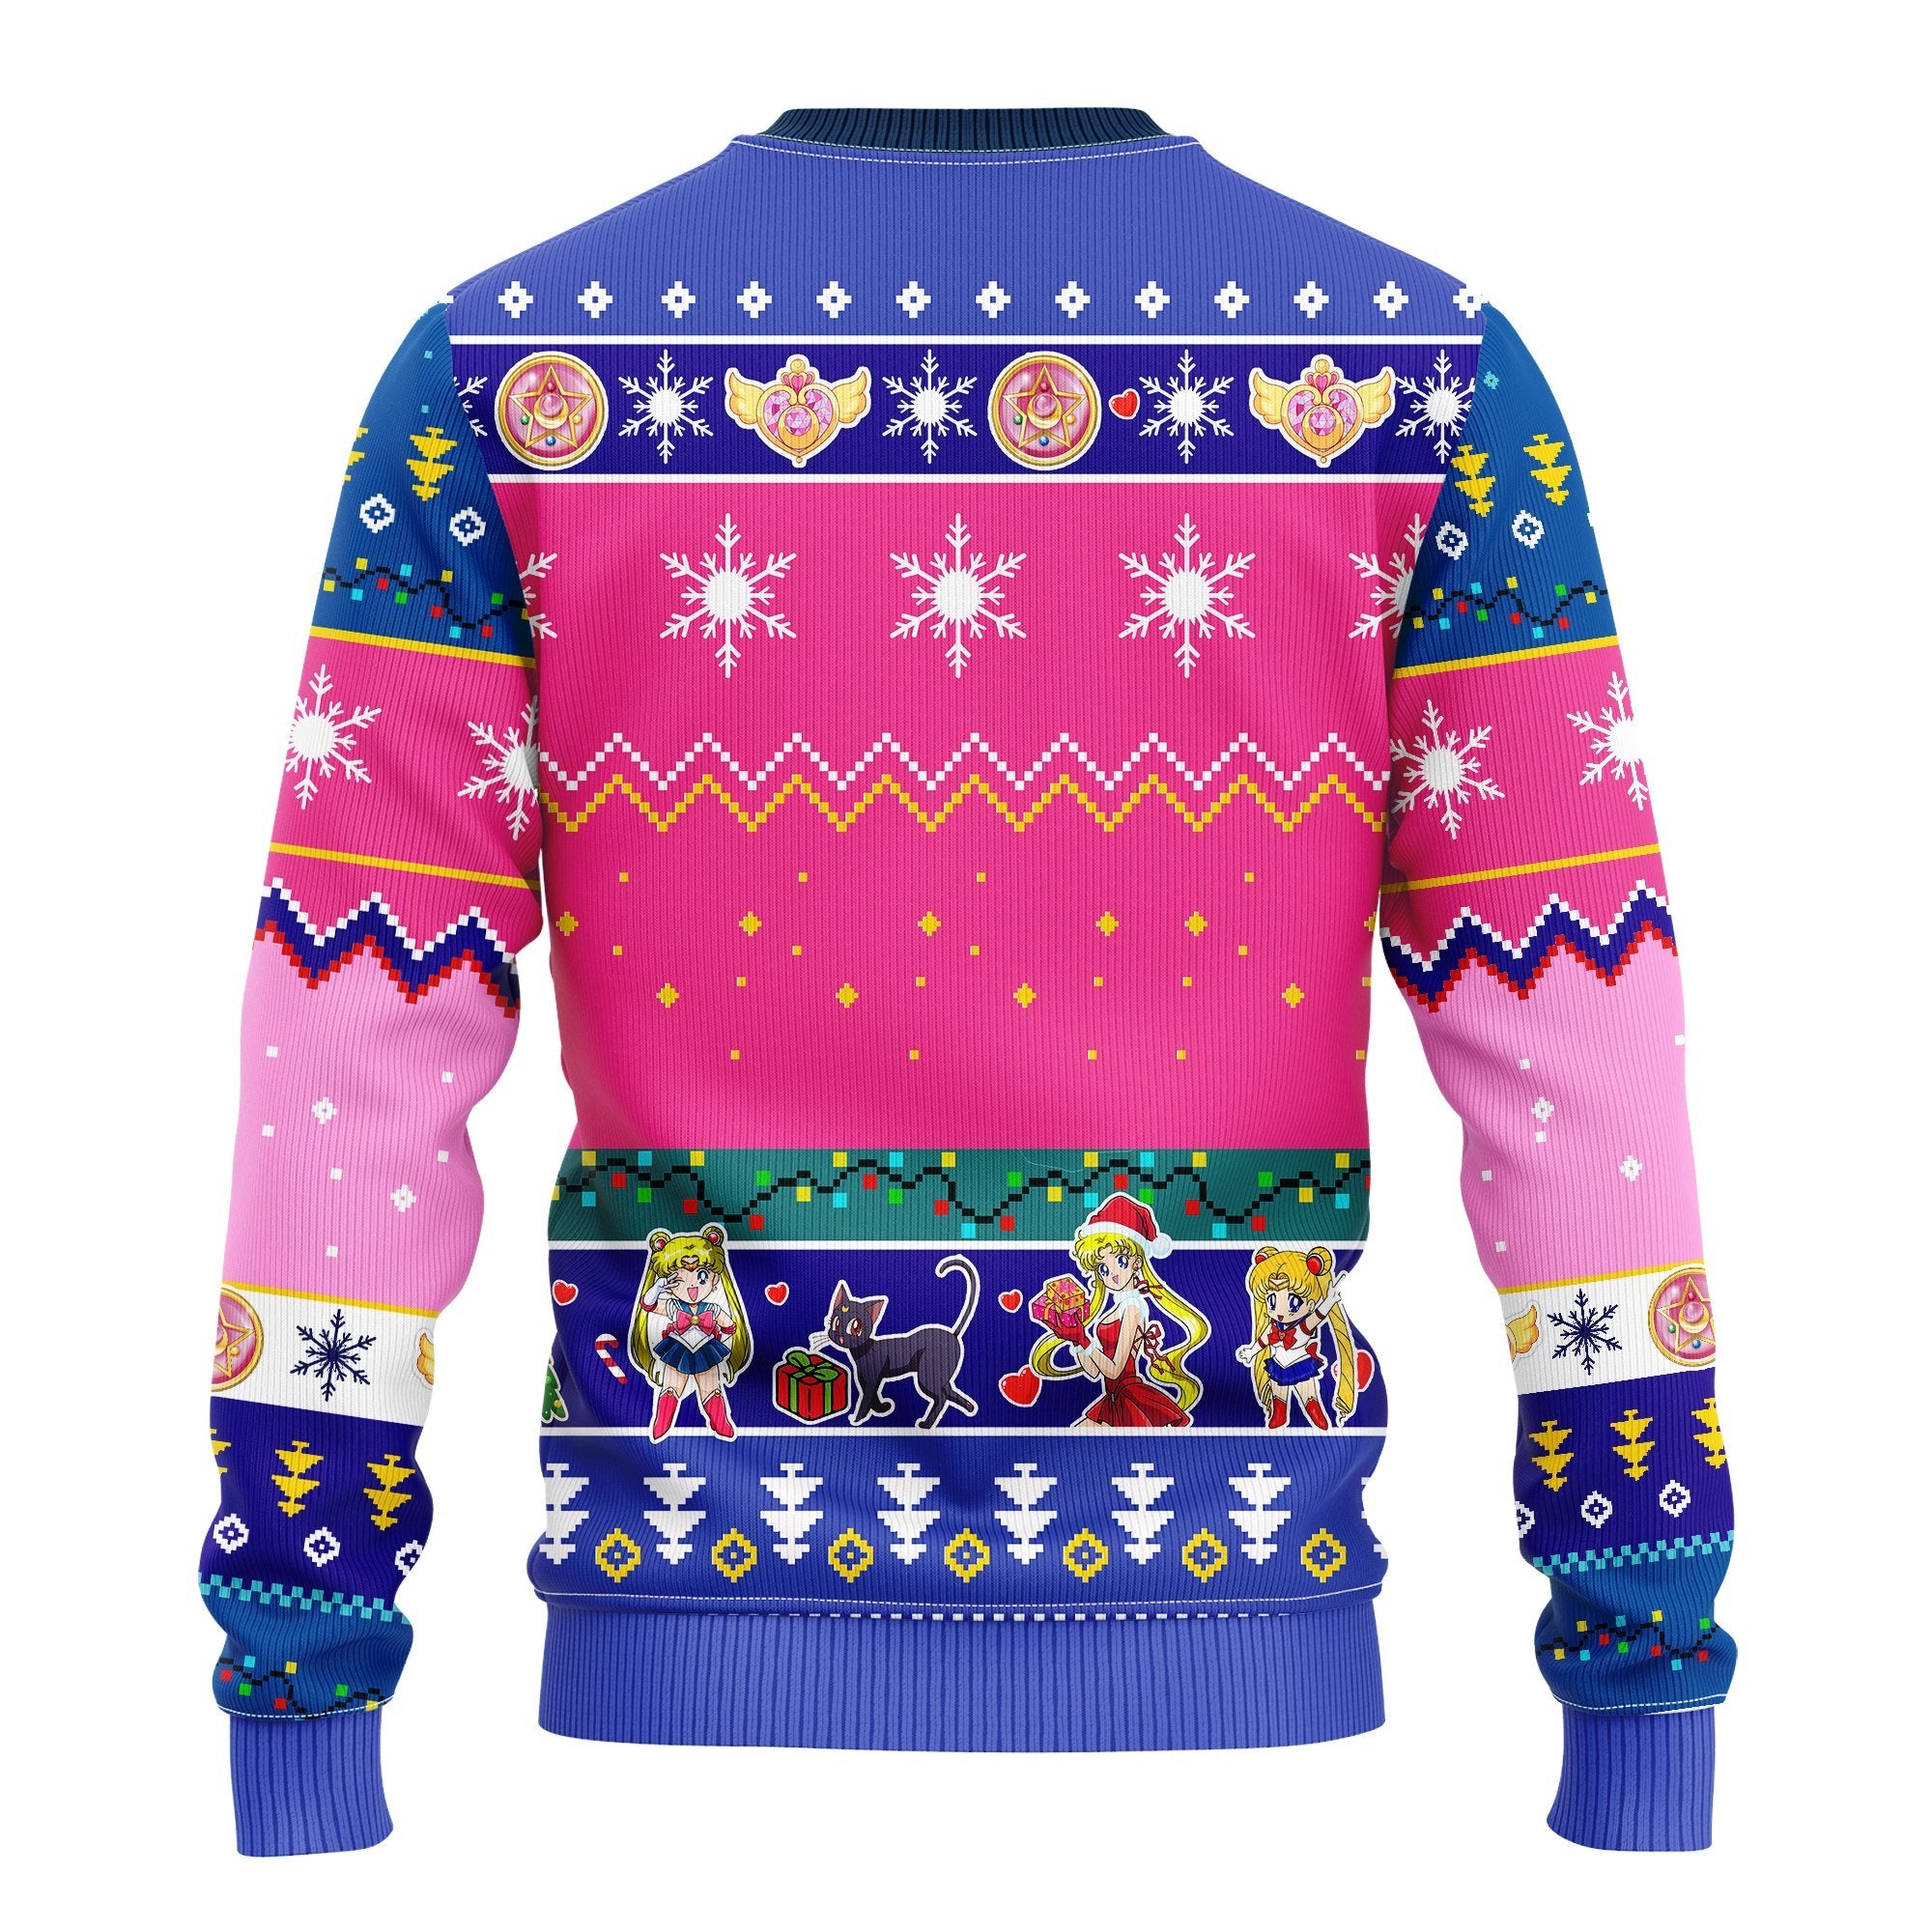 Sailor Moon Ugly Christmas Sweater Amazing Gift Idea Thanksgiving Gift